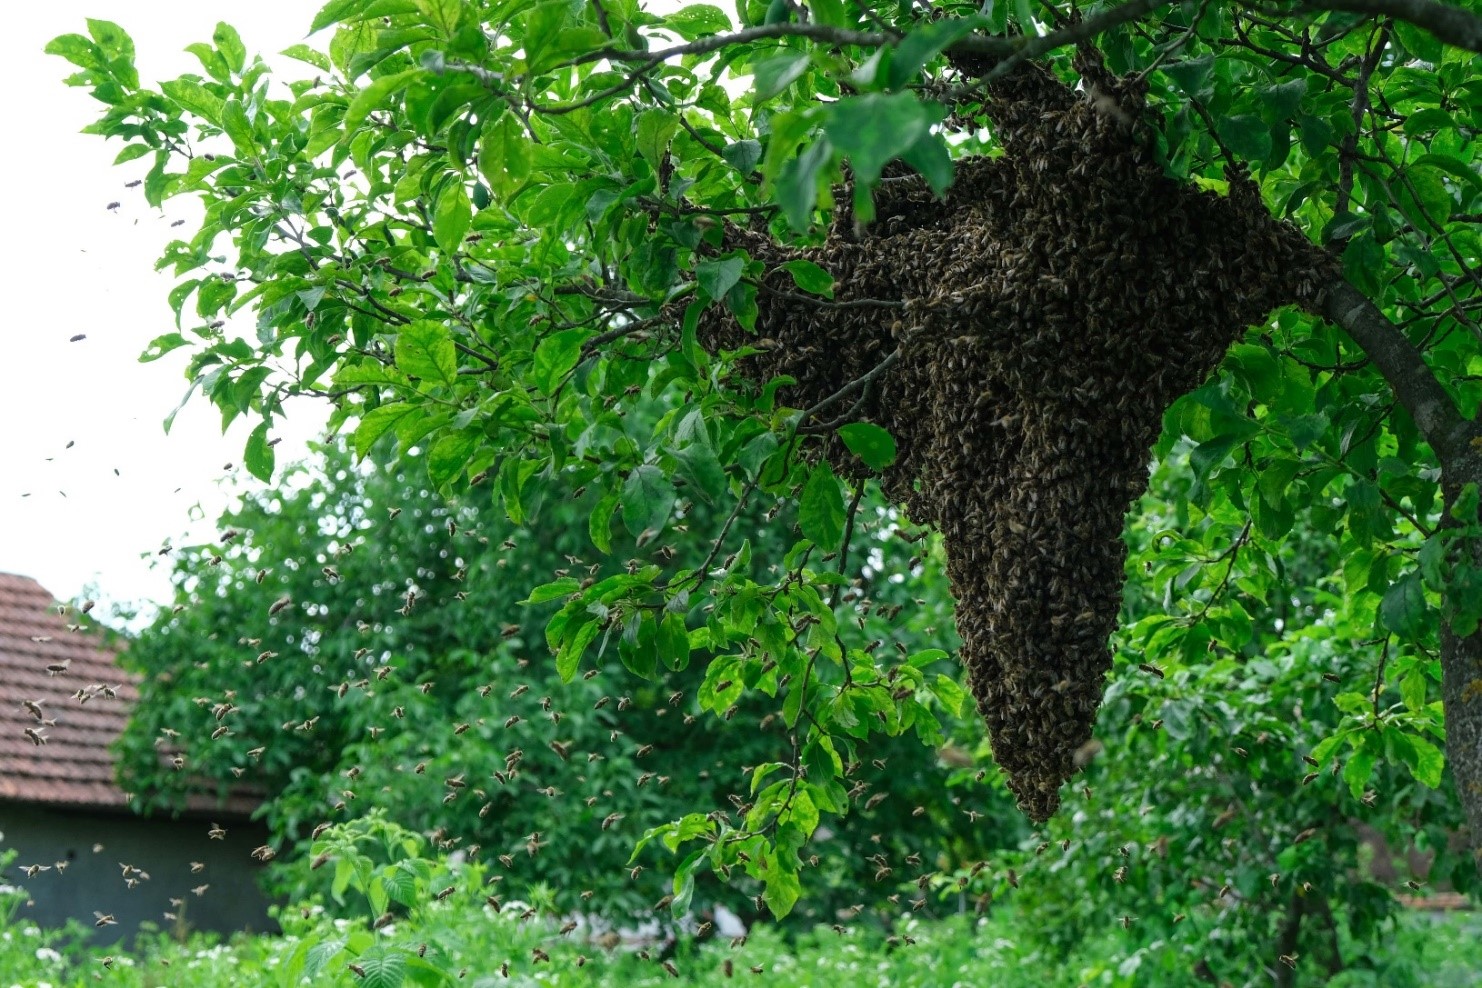 A swarm of bees in a tree